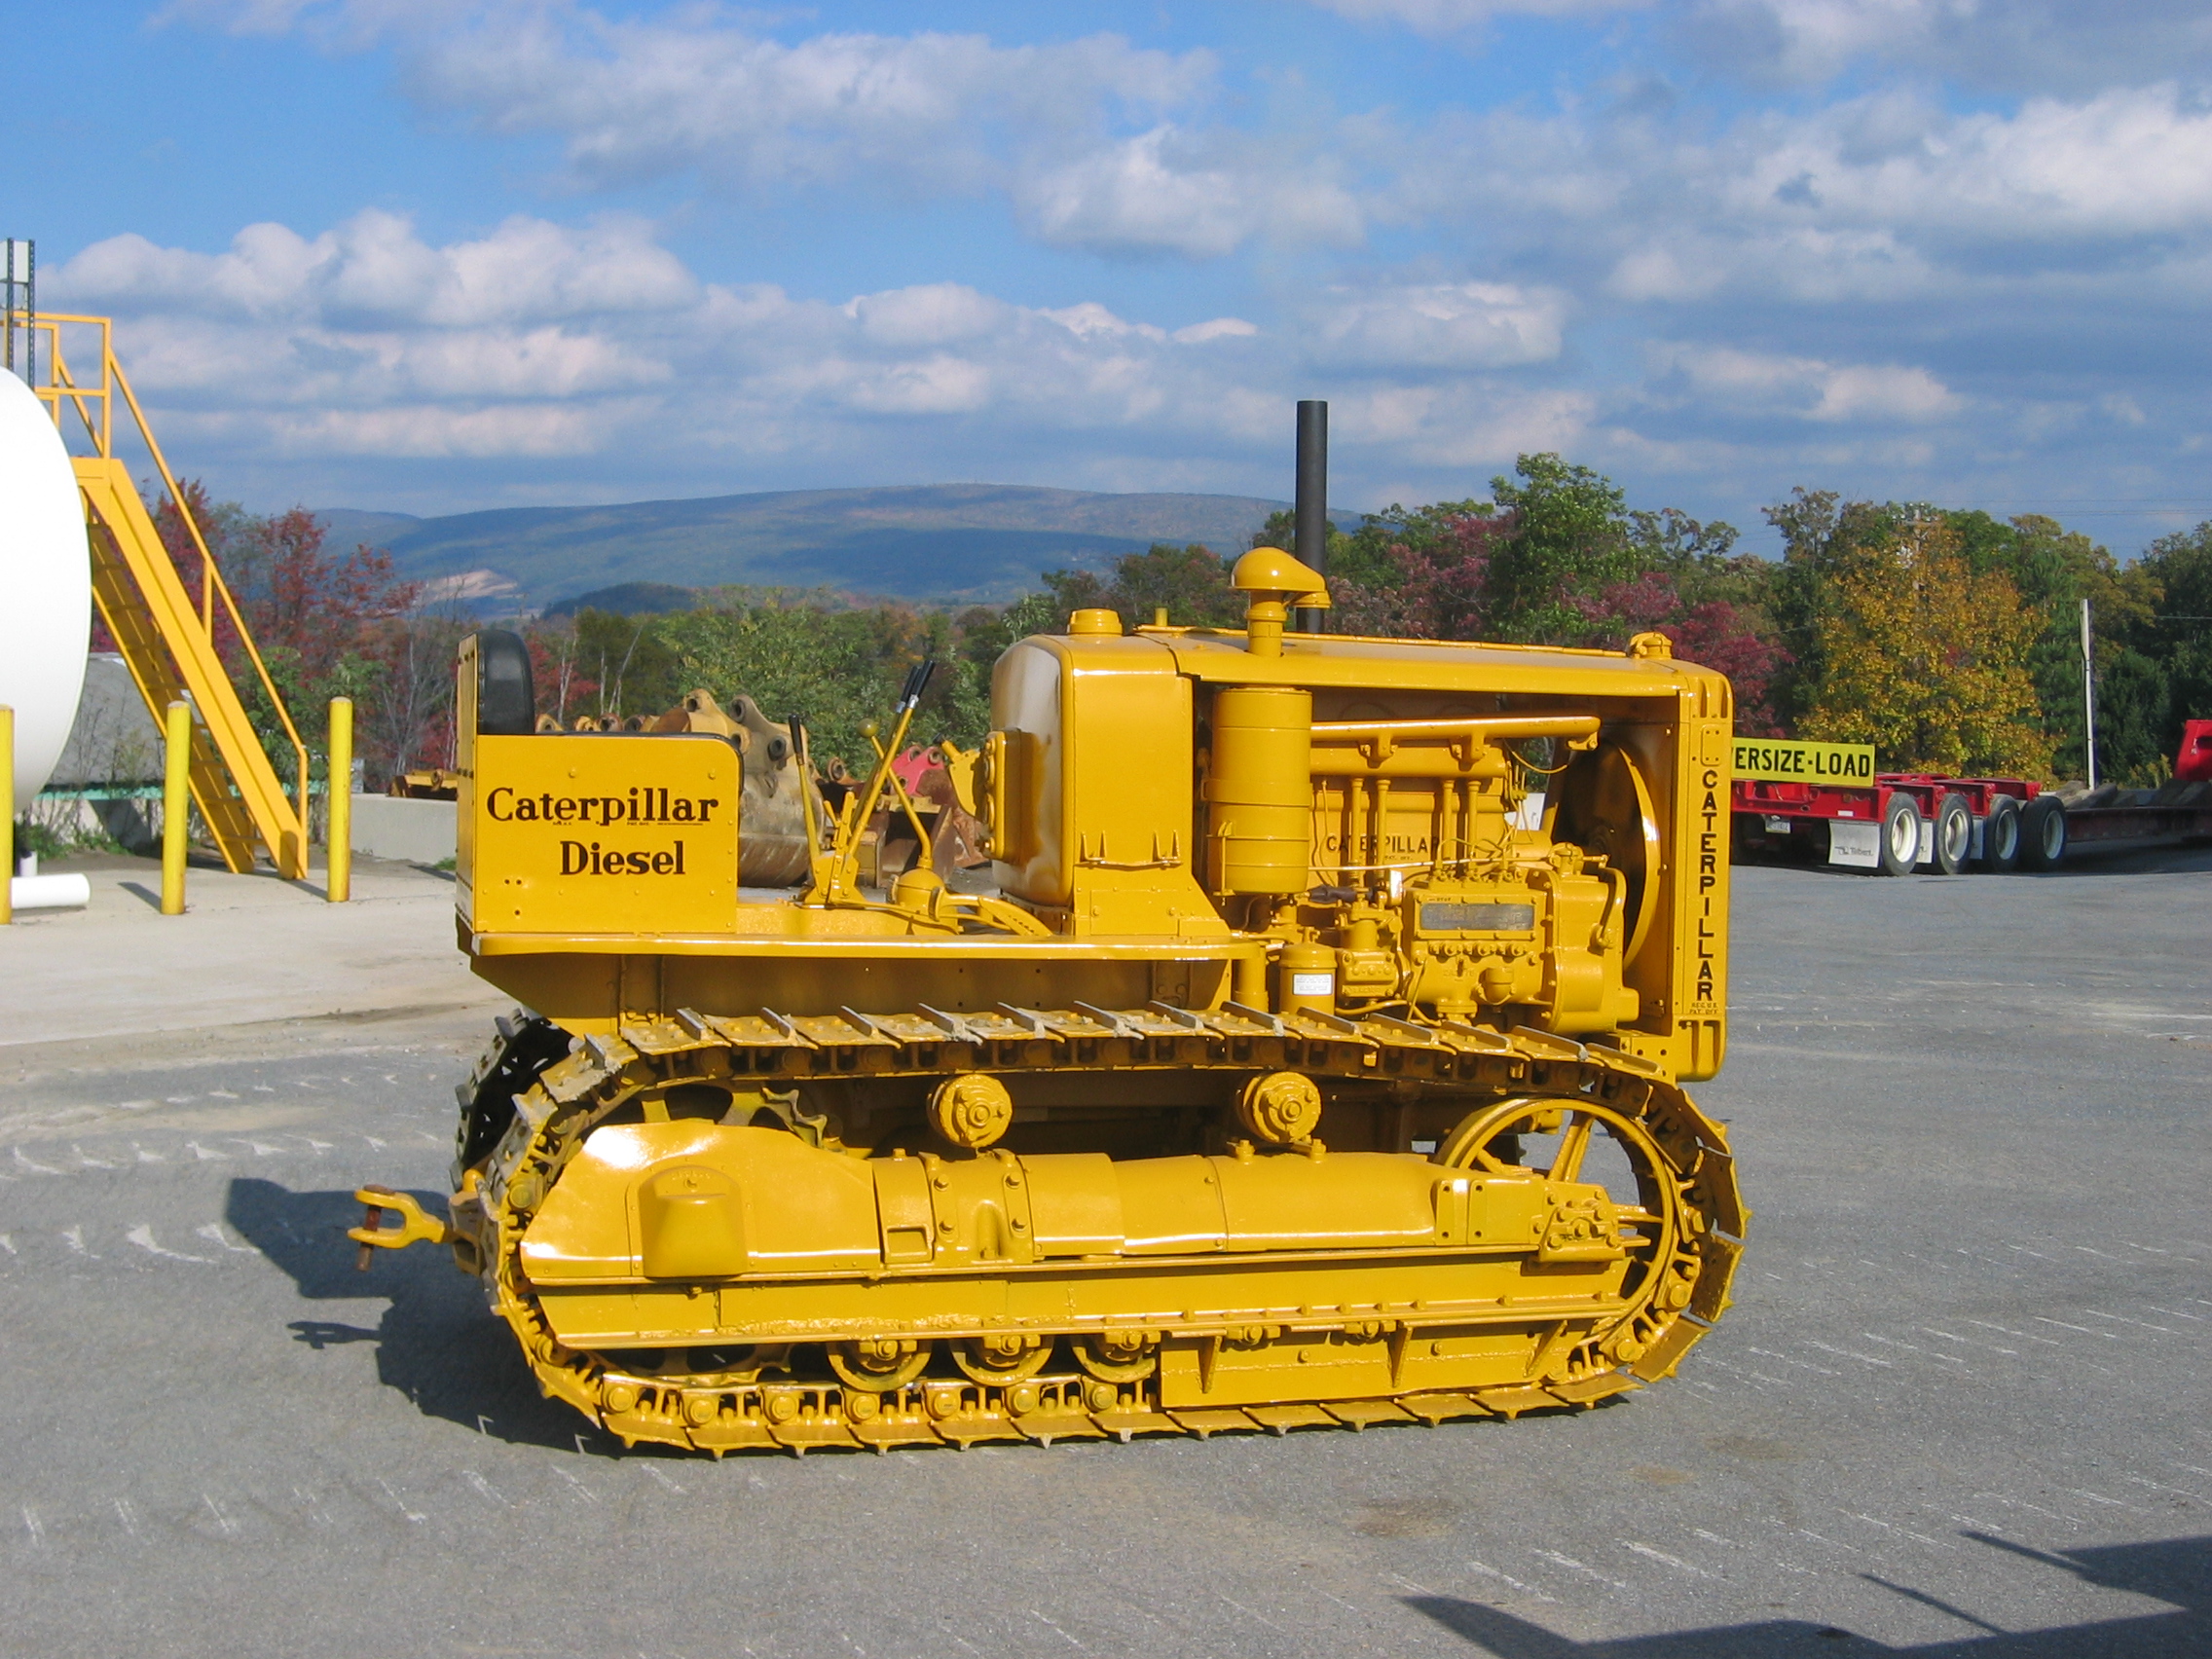 Caterpillar Forty Diesel, Duncansville, PA